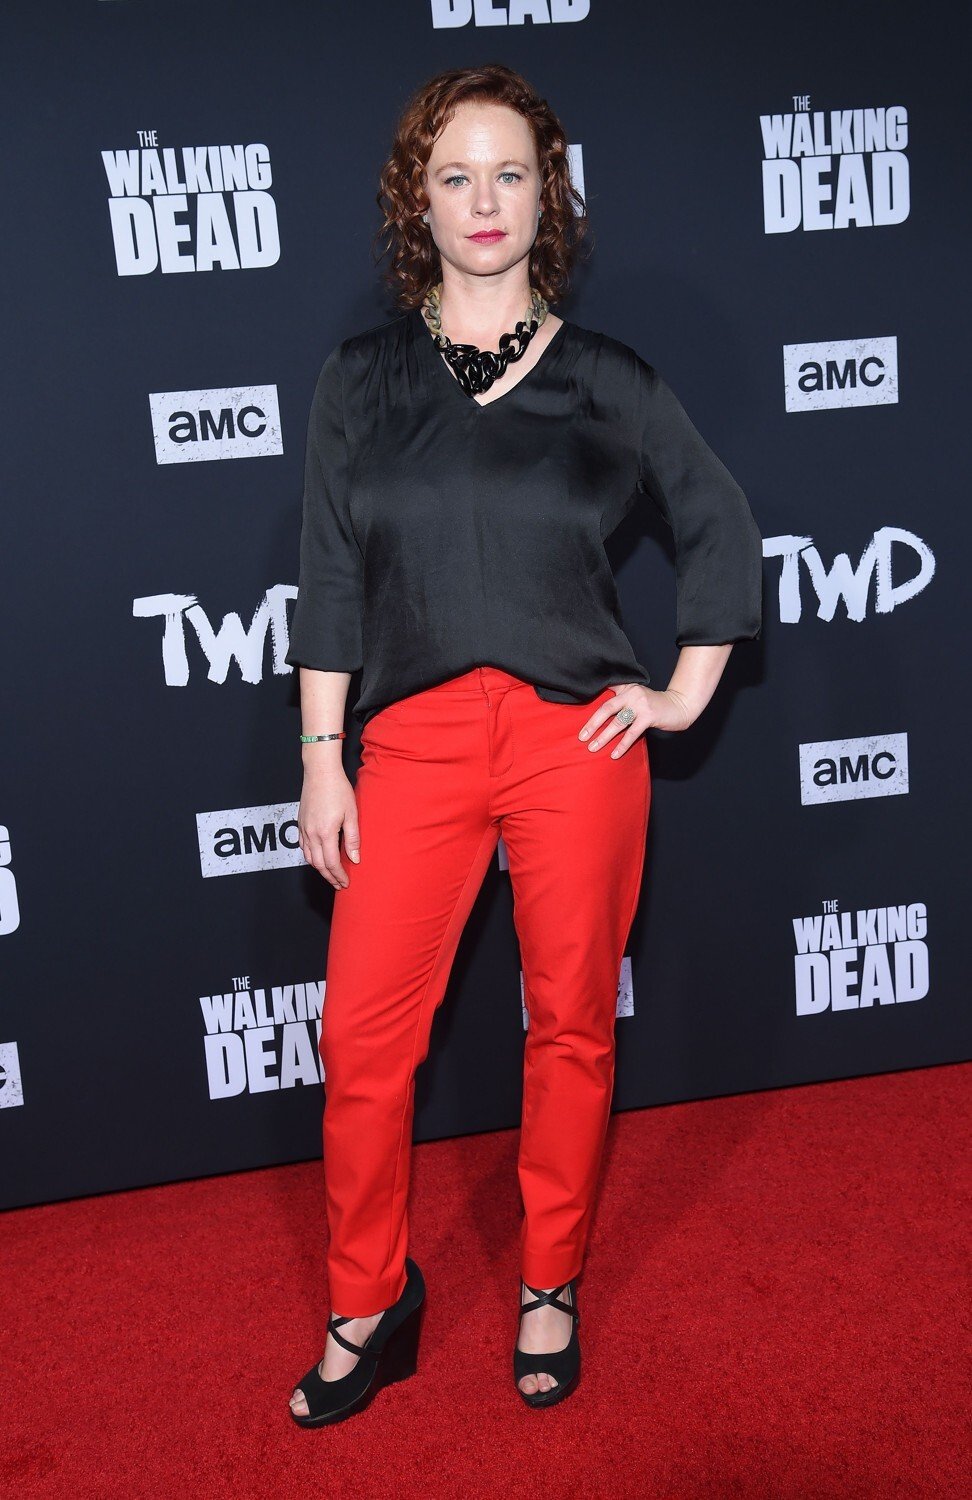 US actress Thora Birch plays Gamma in Season 10 of The Walking Dead. Photo: AFP